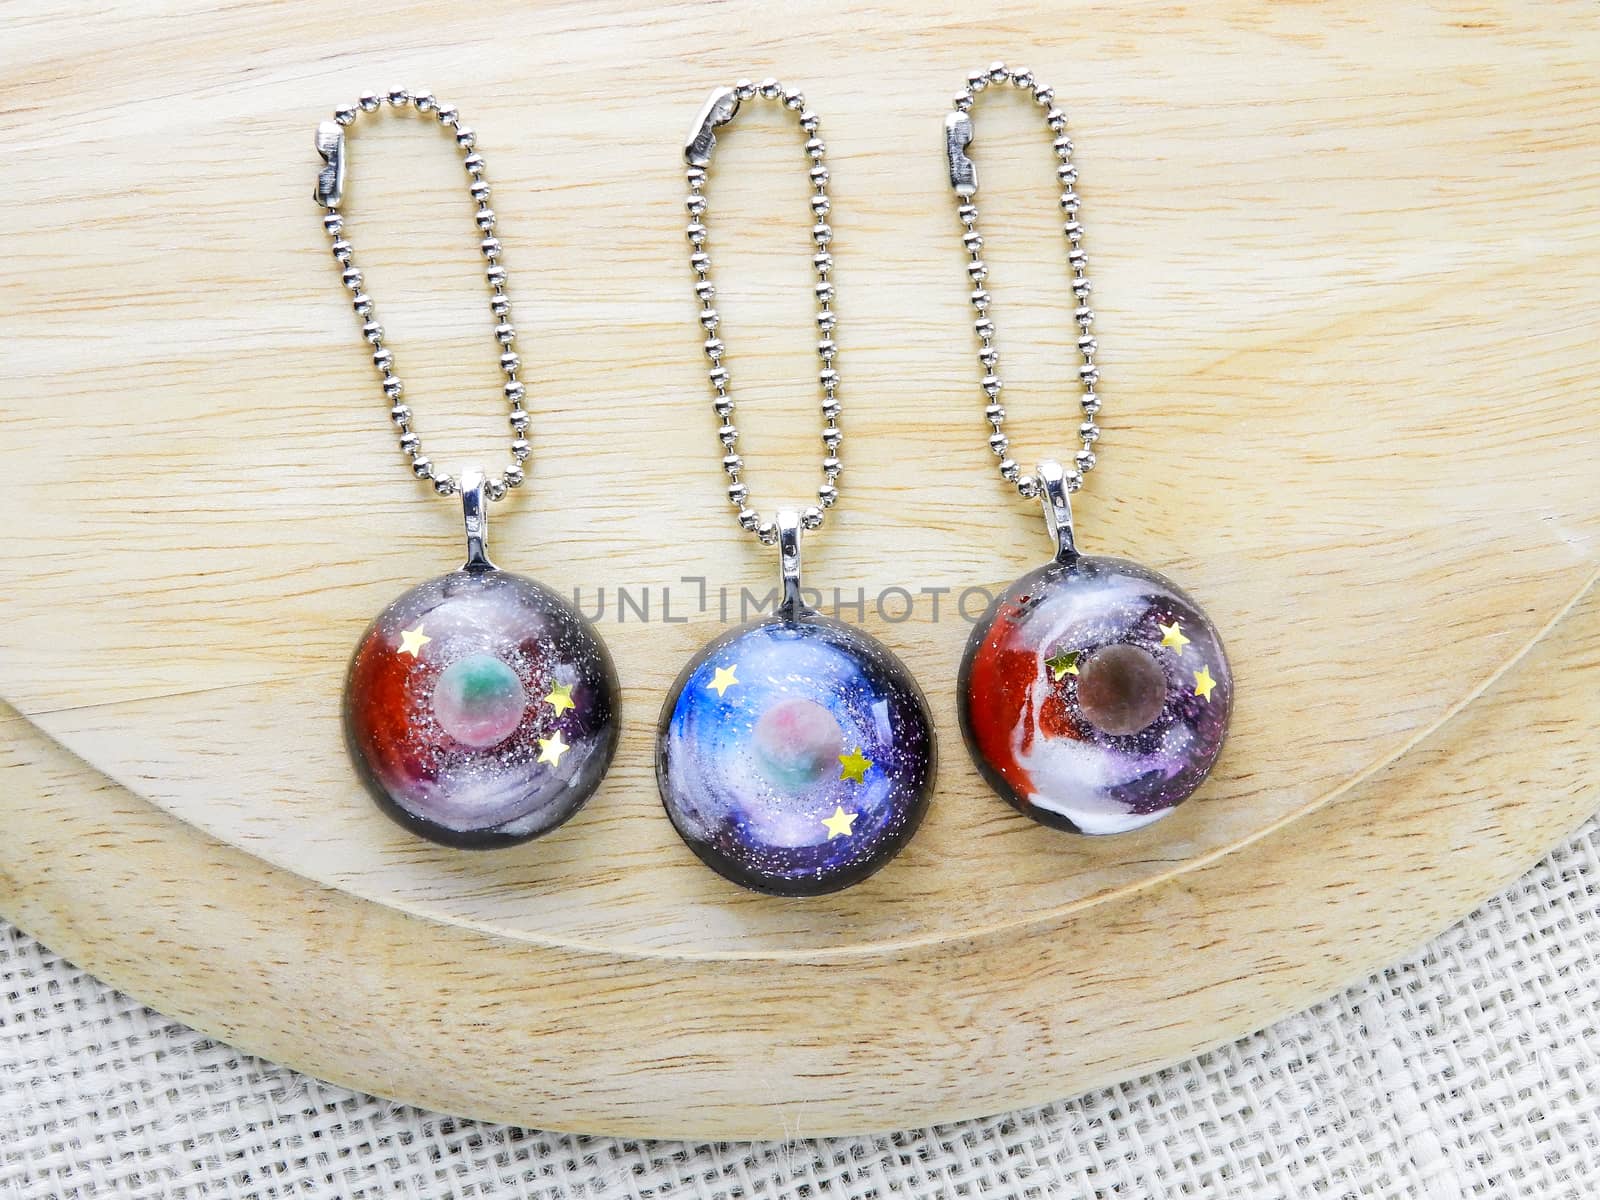 Create galaxy drink coasters using resin, glitter and pigment powders, handmade items. Suitable for keychains, necklace and pendant.
